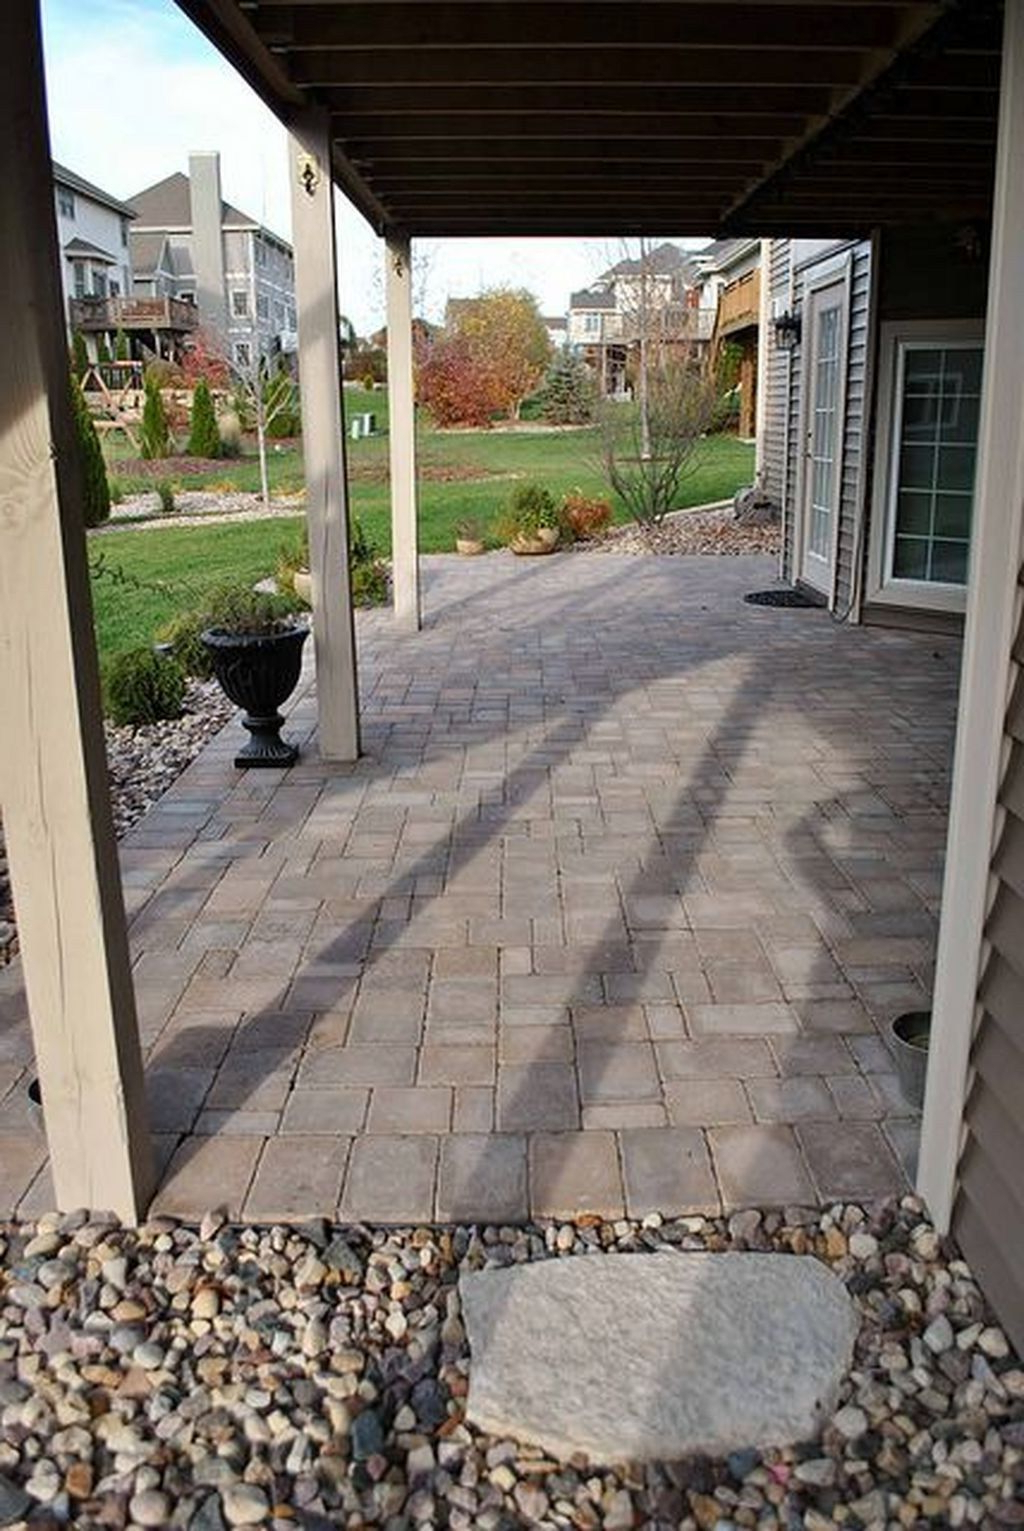 46 Awesome Brick Patterns Patio Ideas For Your Beautiful